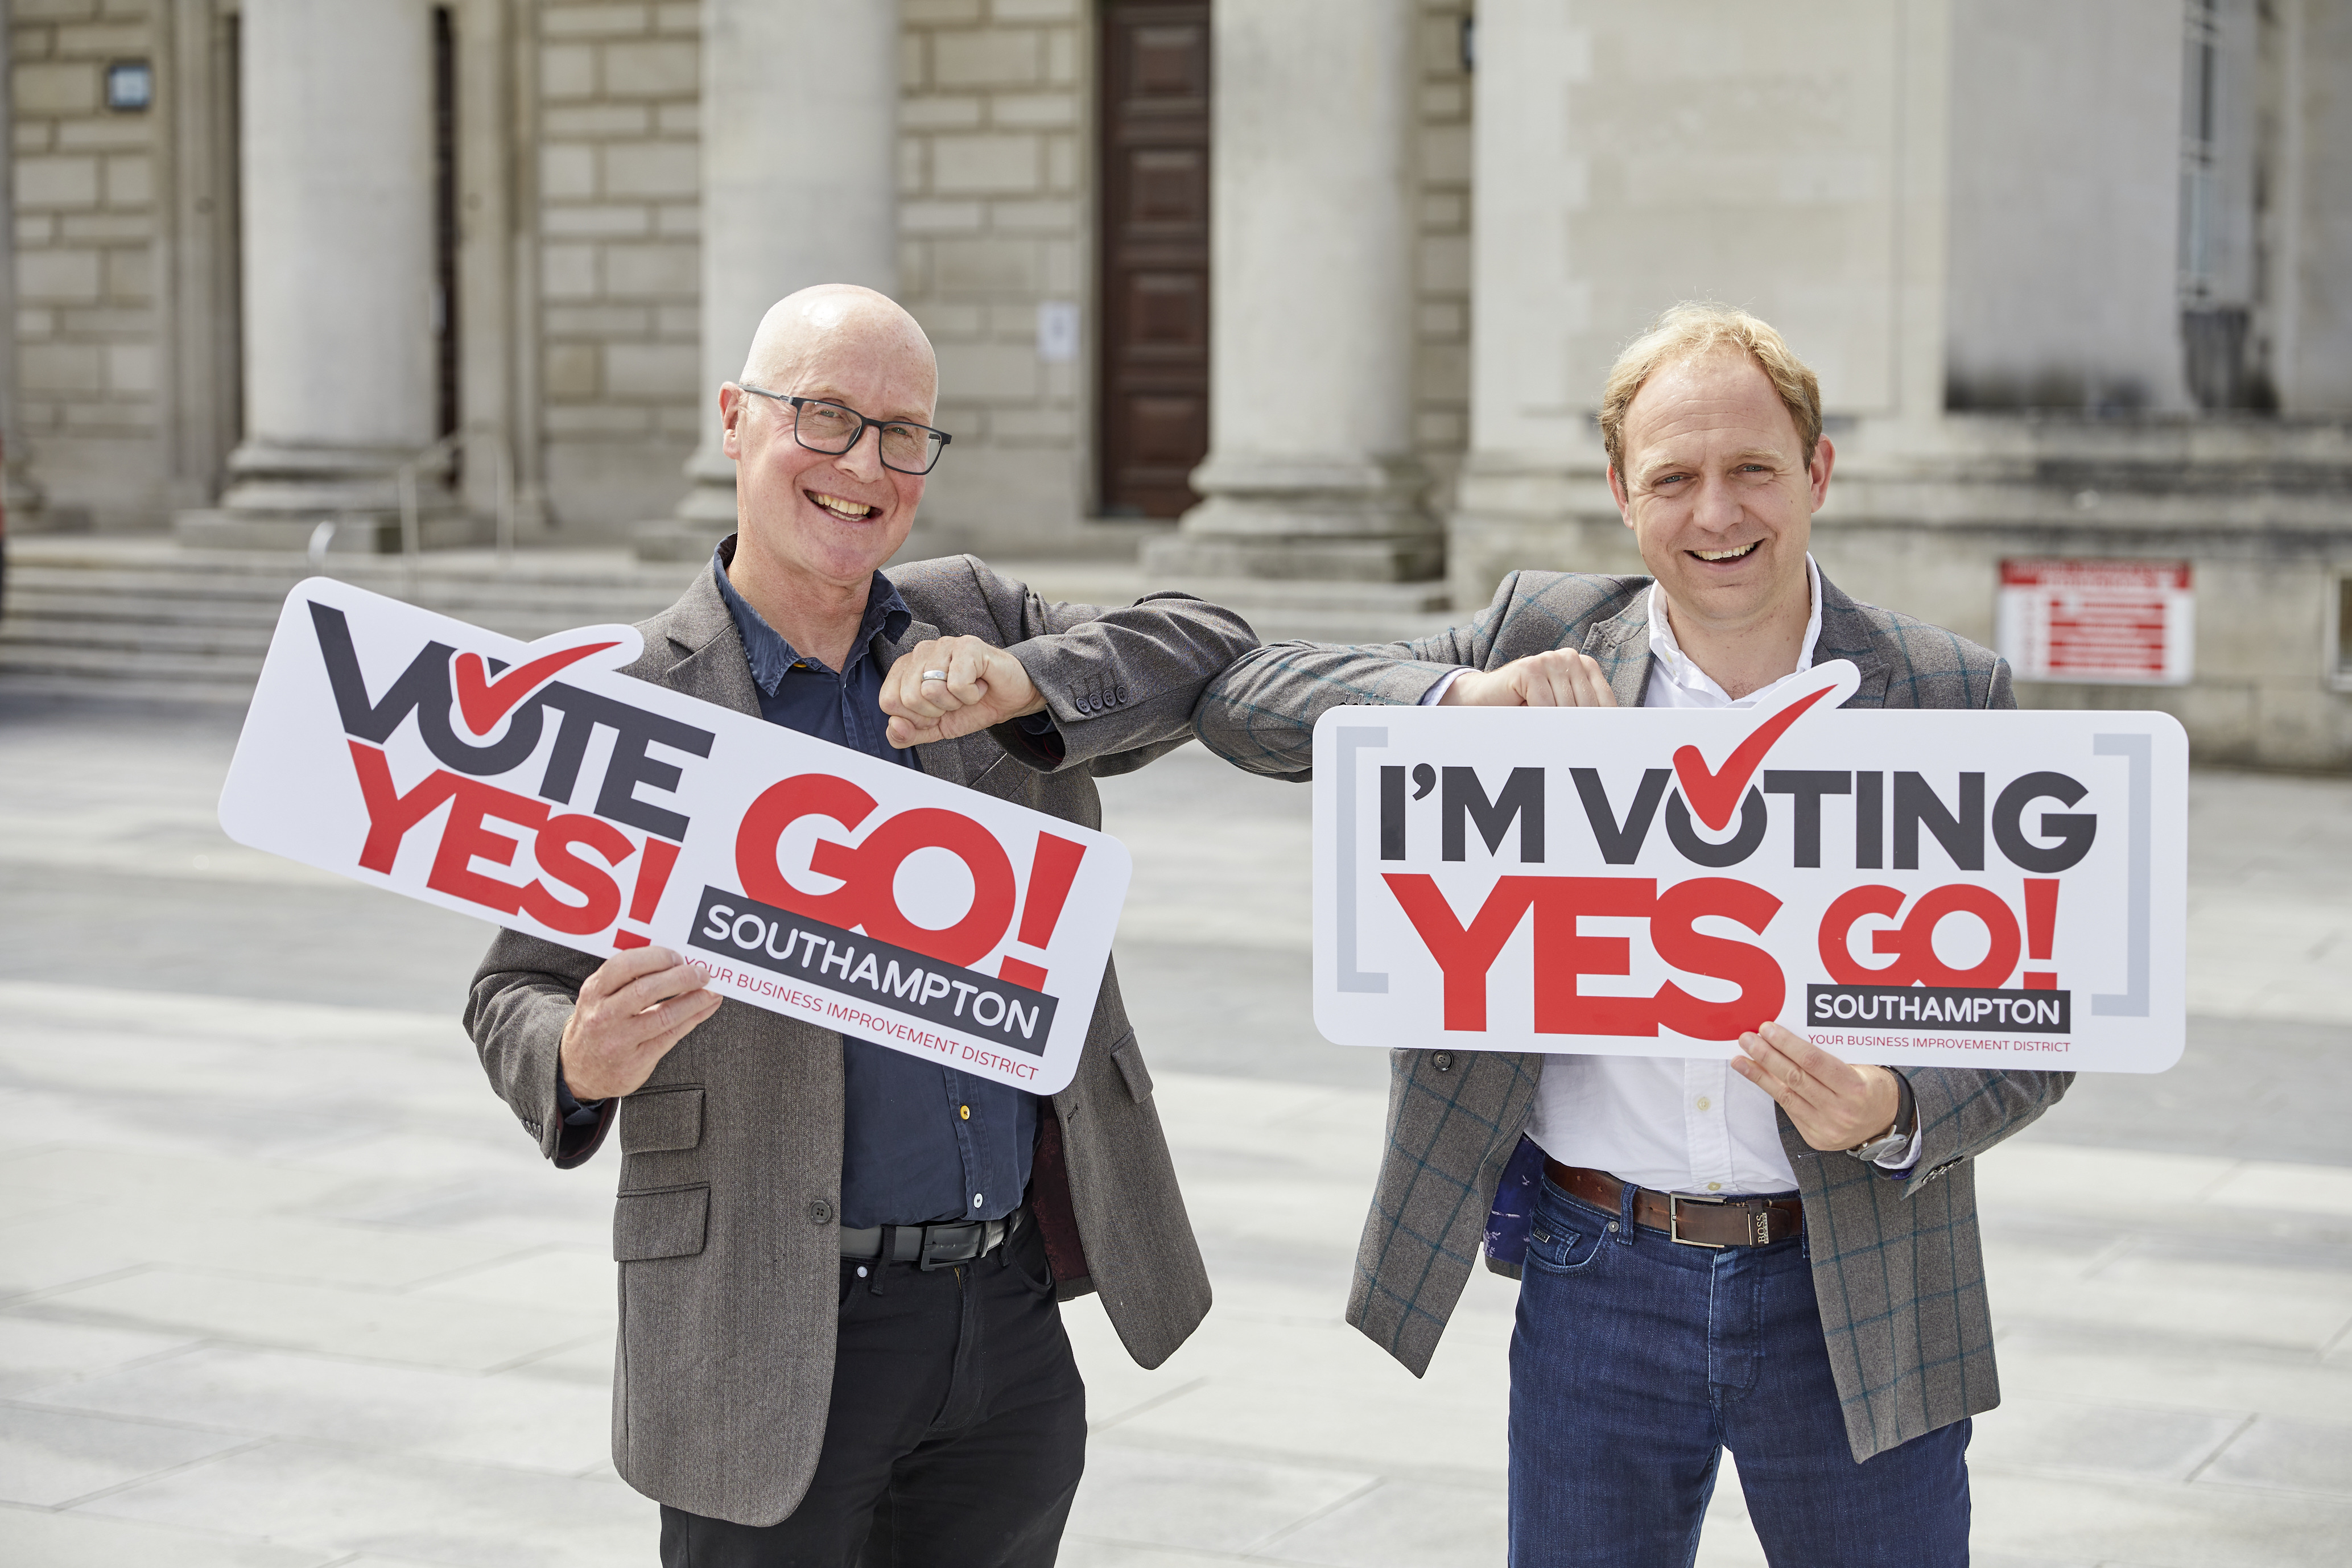 Giles Semper and Councillor Fitzhenry touching elbows and holding signs saying 'Vote Yes!' and 'Go! Southampton'